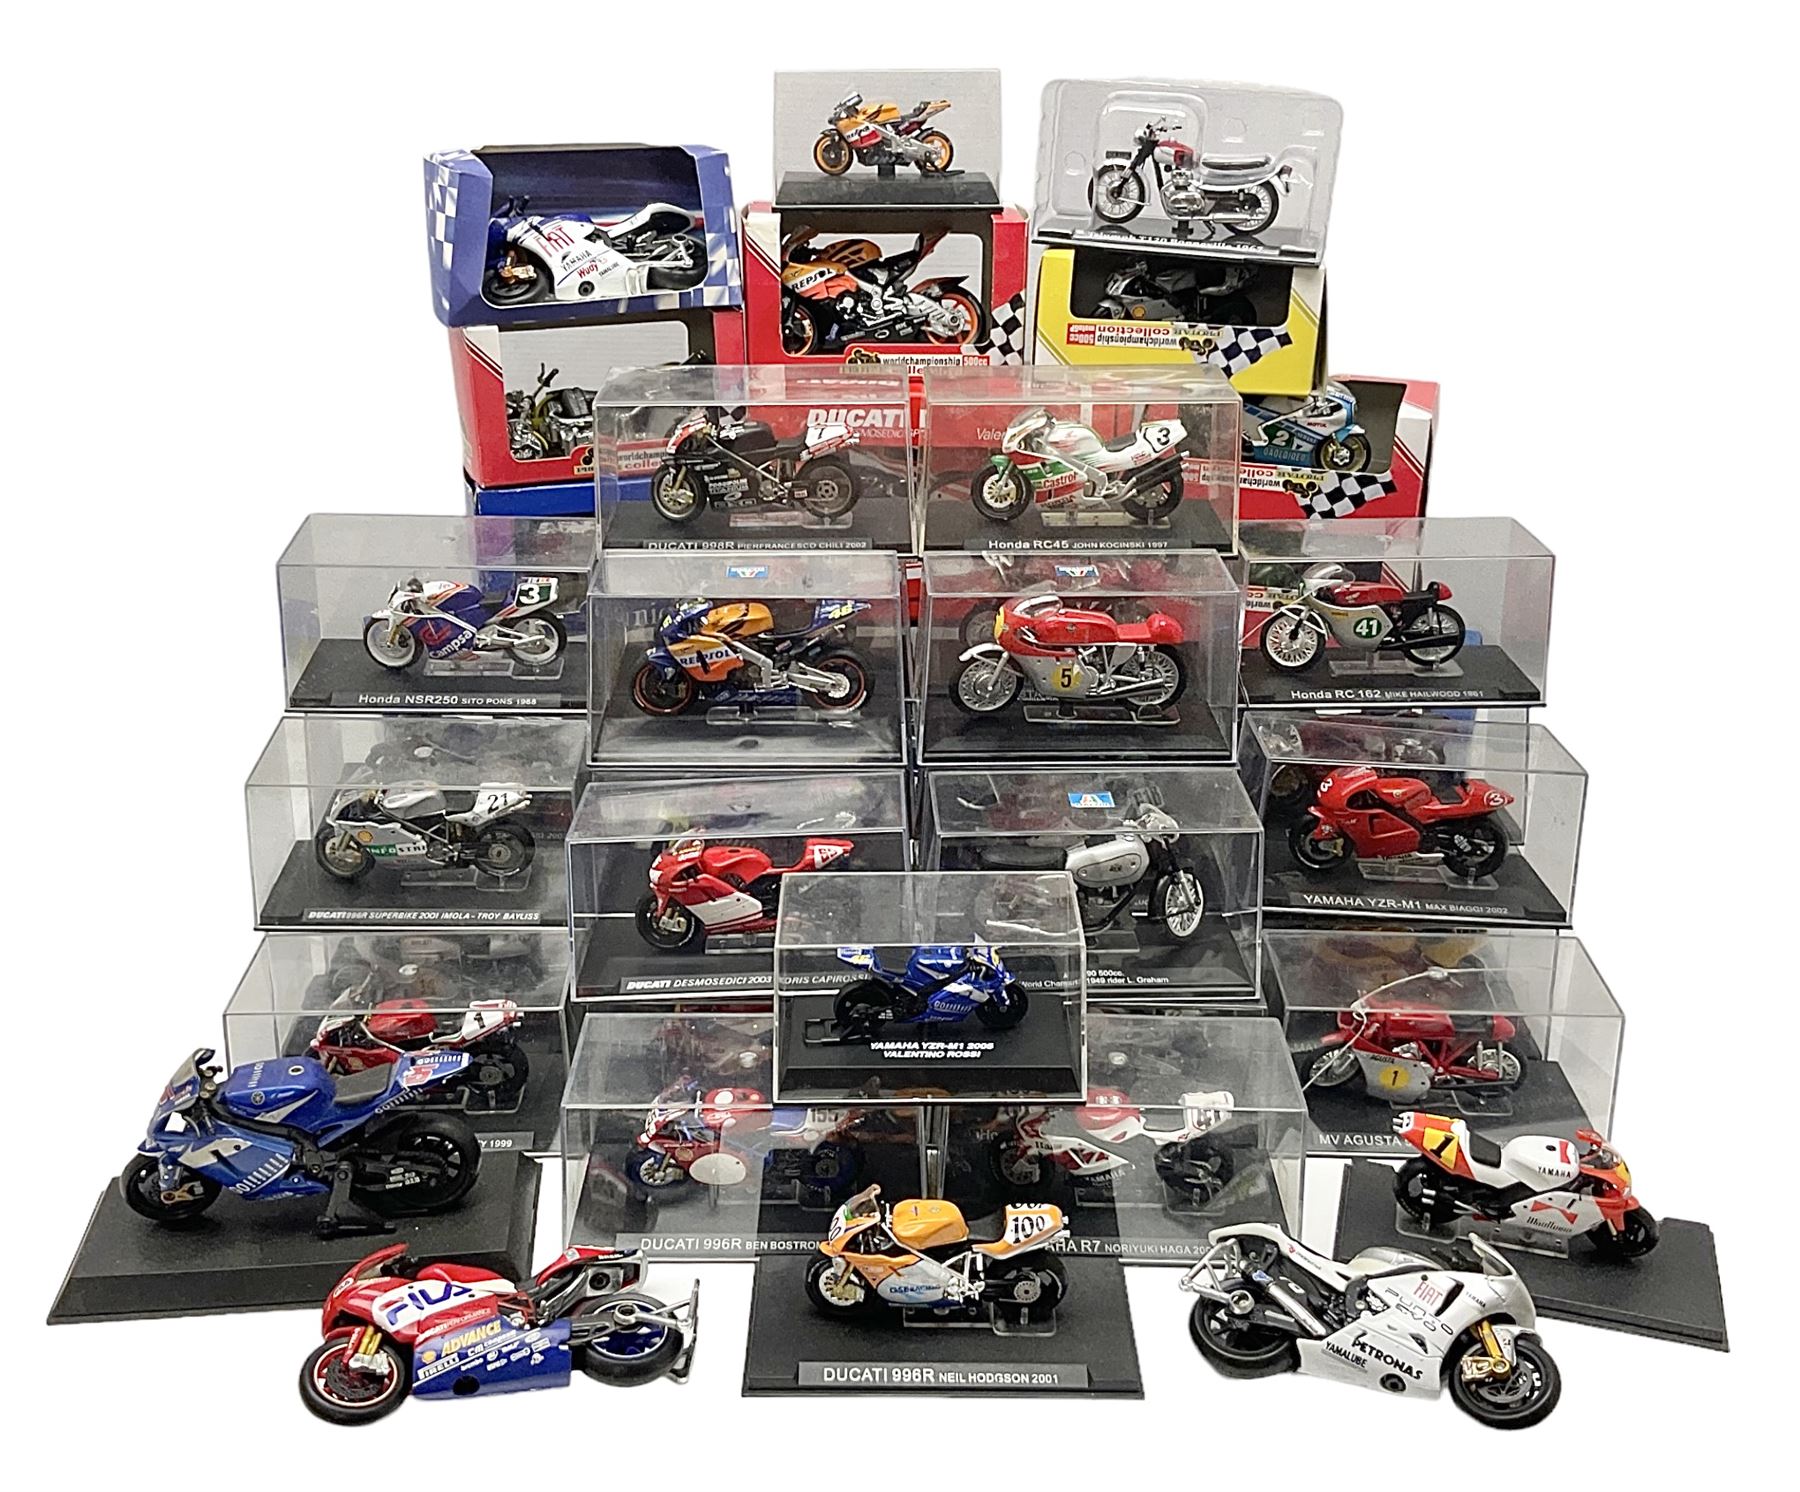 Fifty-one die-cast models of motorcycles by Maisto